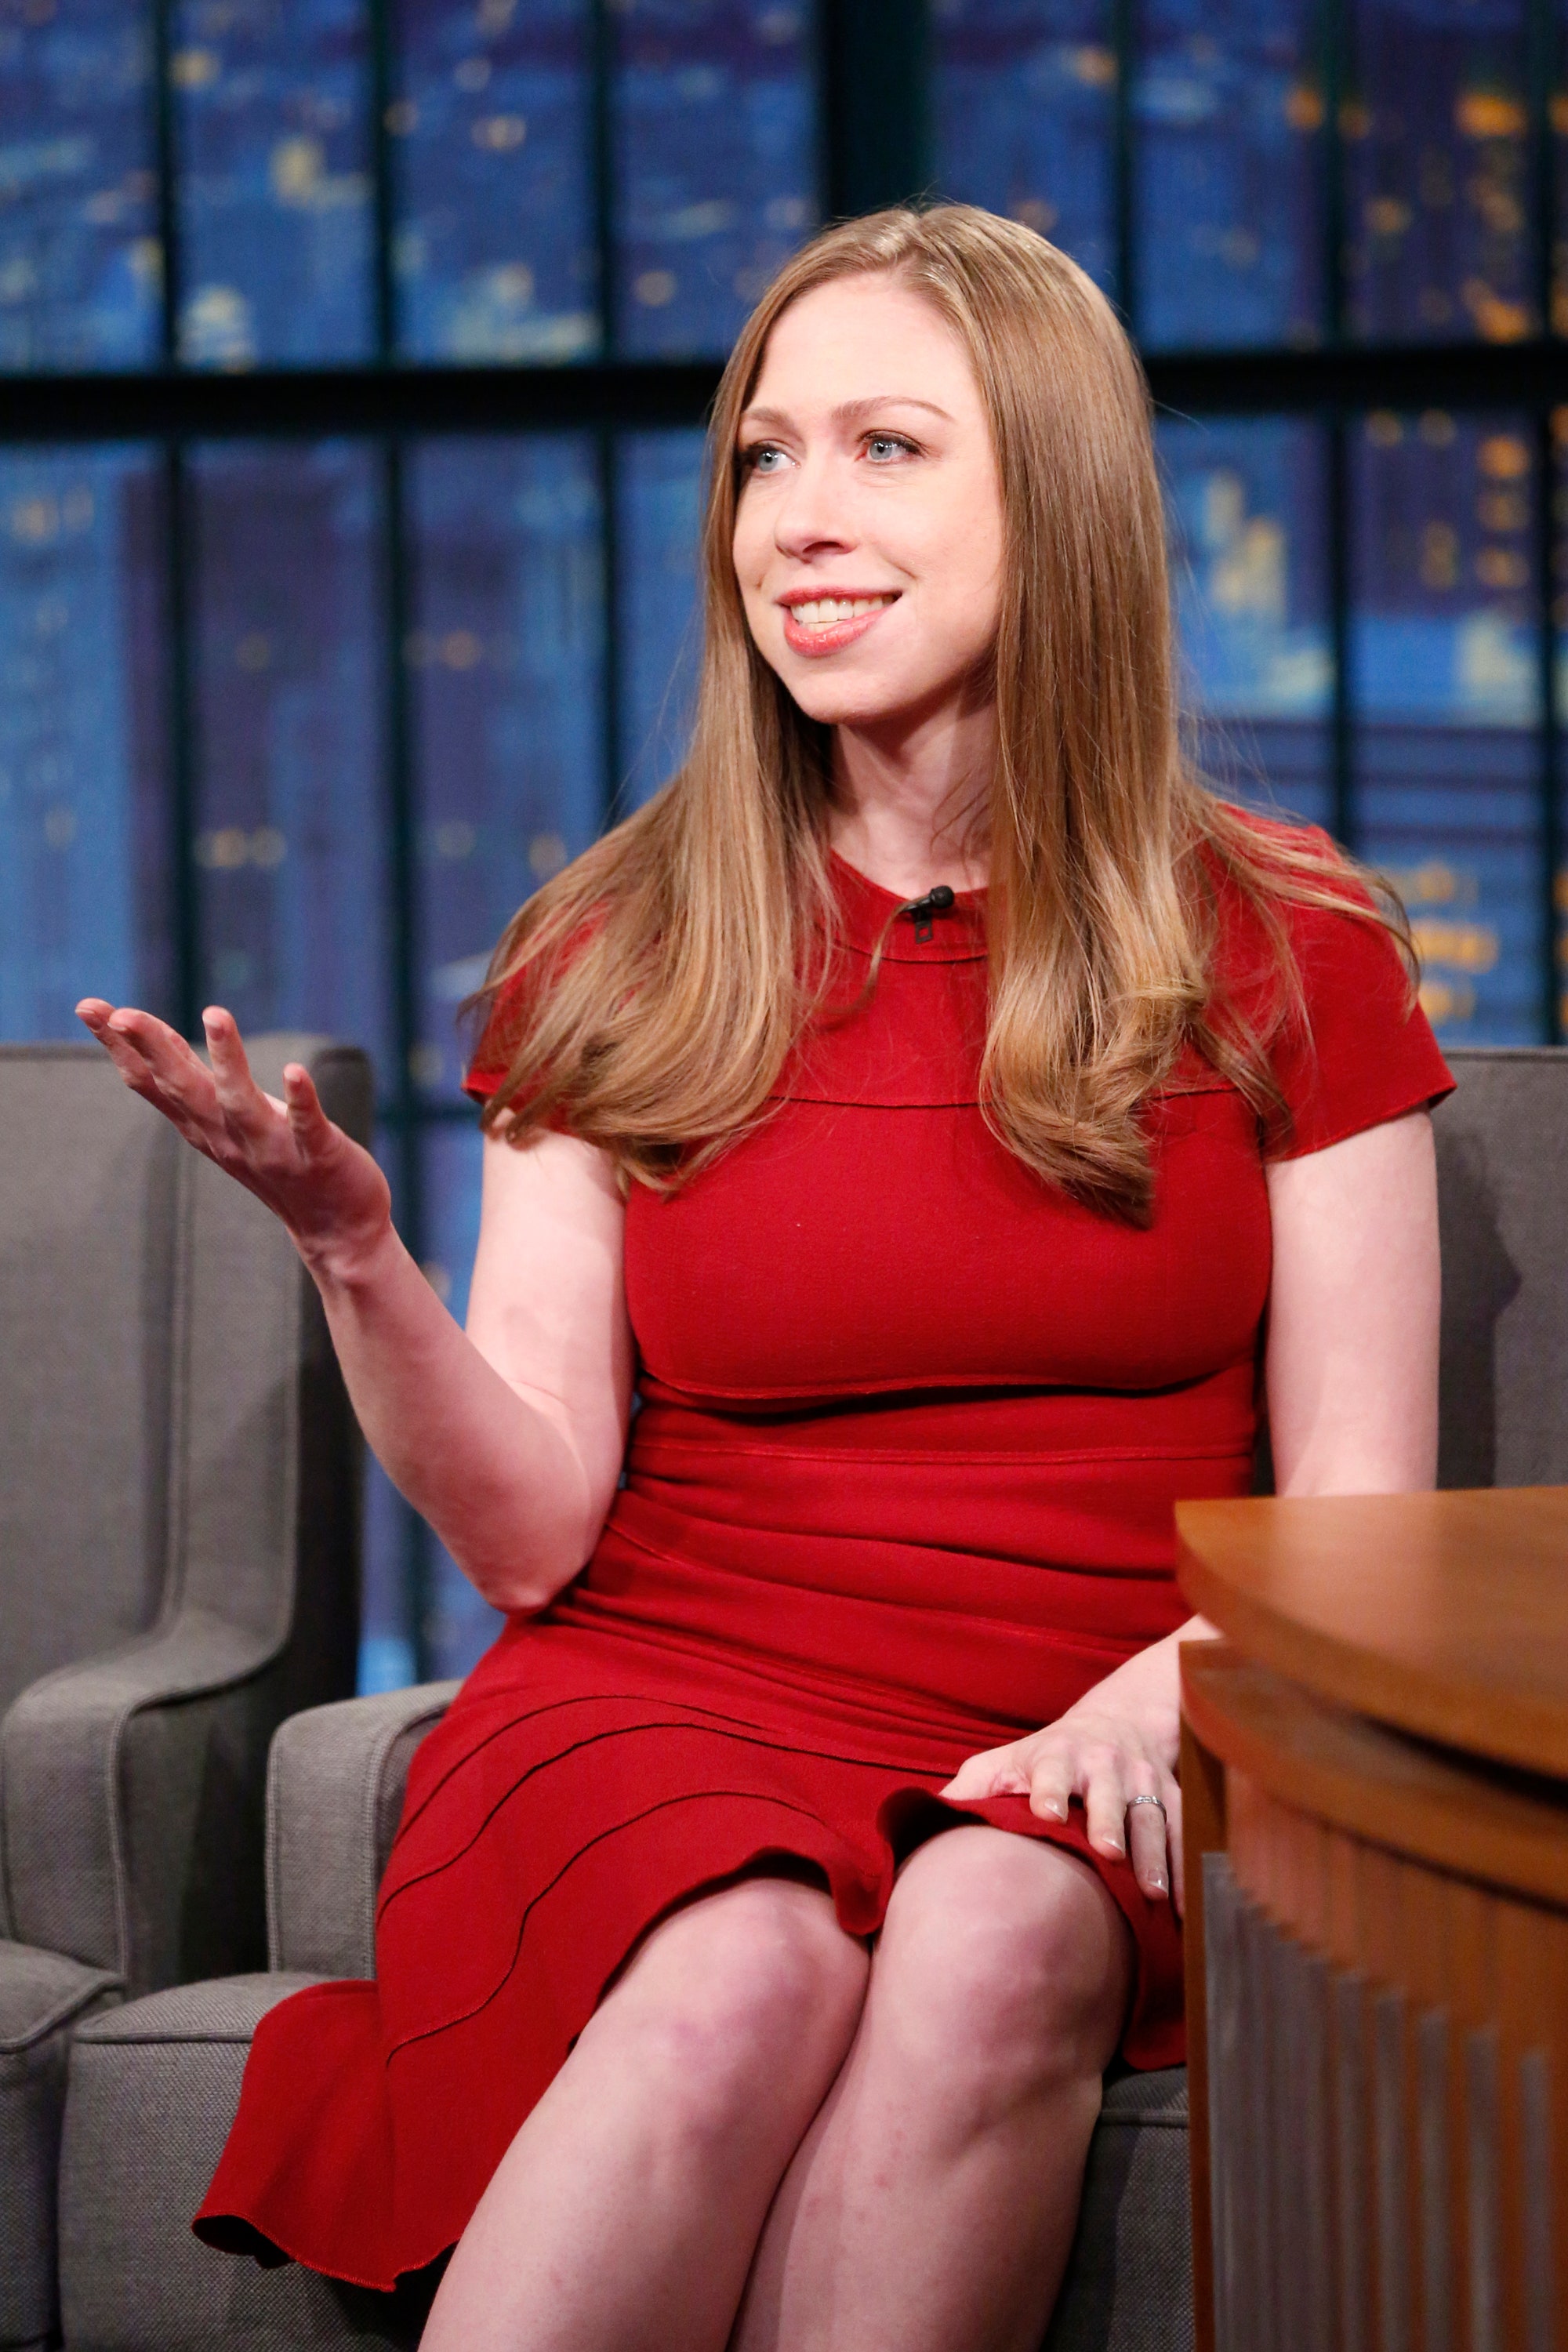 Nude Photos Of Chelsea Clinton with peacock